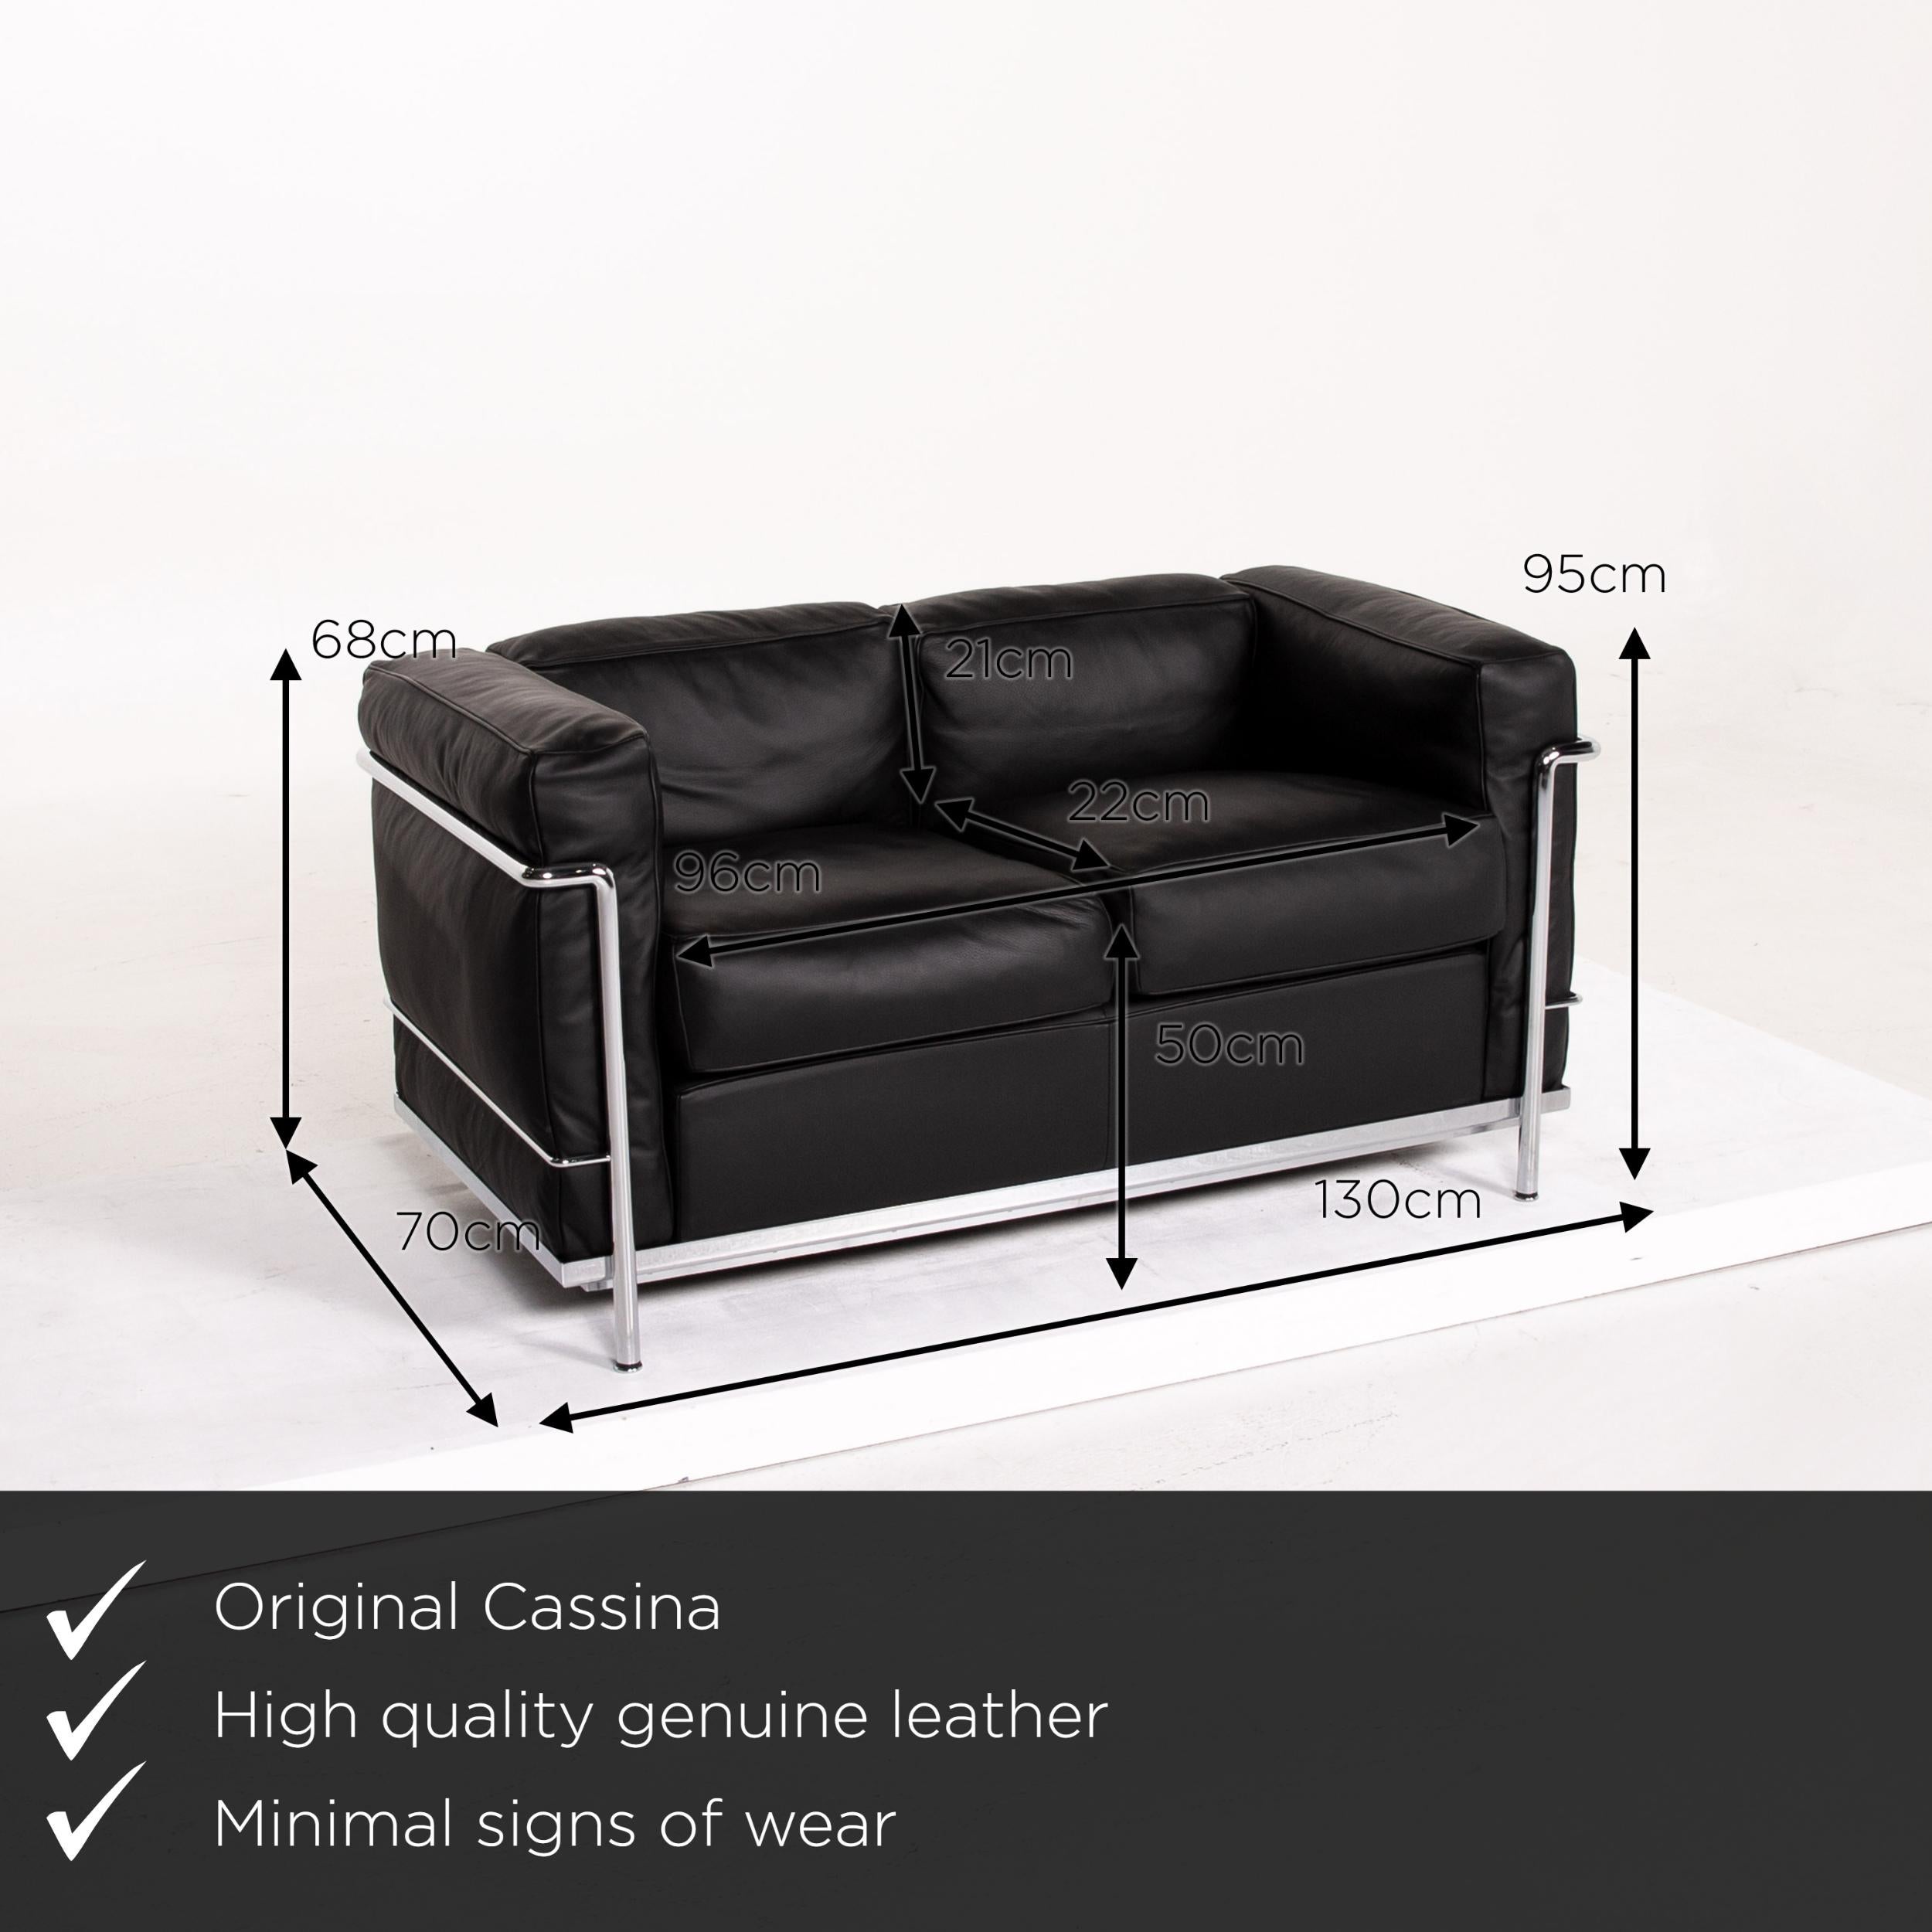 We present to you a Cassina Le Corbusier LC 2 leather sofa black two-seat couch.

 

 Product measurements in centimeters:
 

Depth 70
Width 130
Height 68
Seat height 50
Rest height 95
Seat depth 22
Seat width 96
Back height 21.